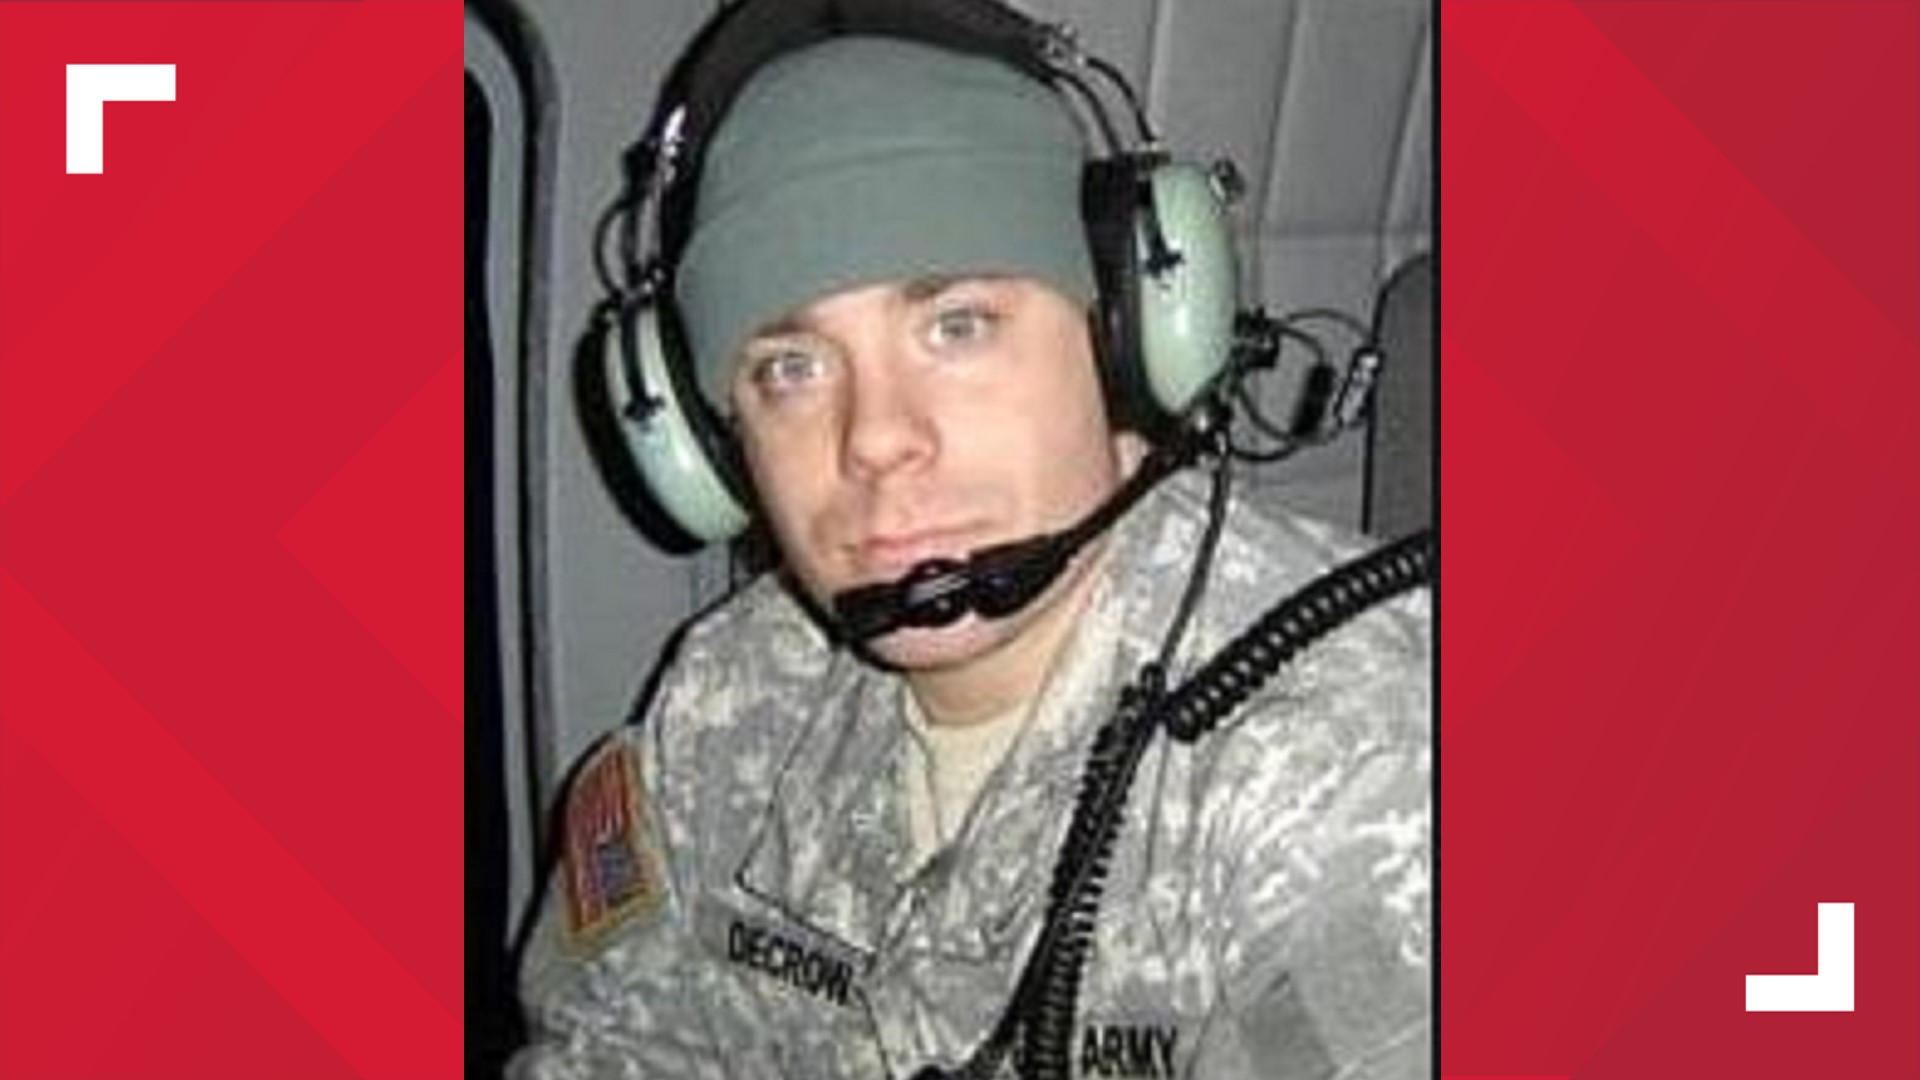 SSG Justin M. DeCrow was killed in a mass shooting on Ft. Hood on Nov. 5, 2009. It was the worst domestic terrorist attack on a military installation.